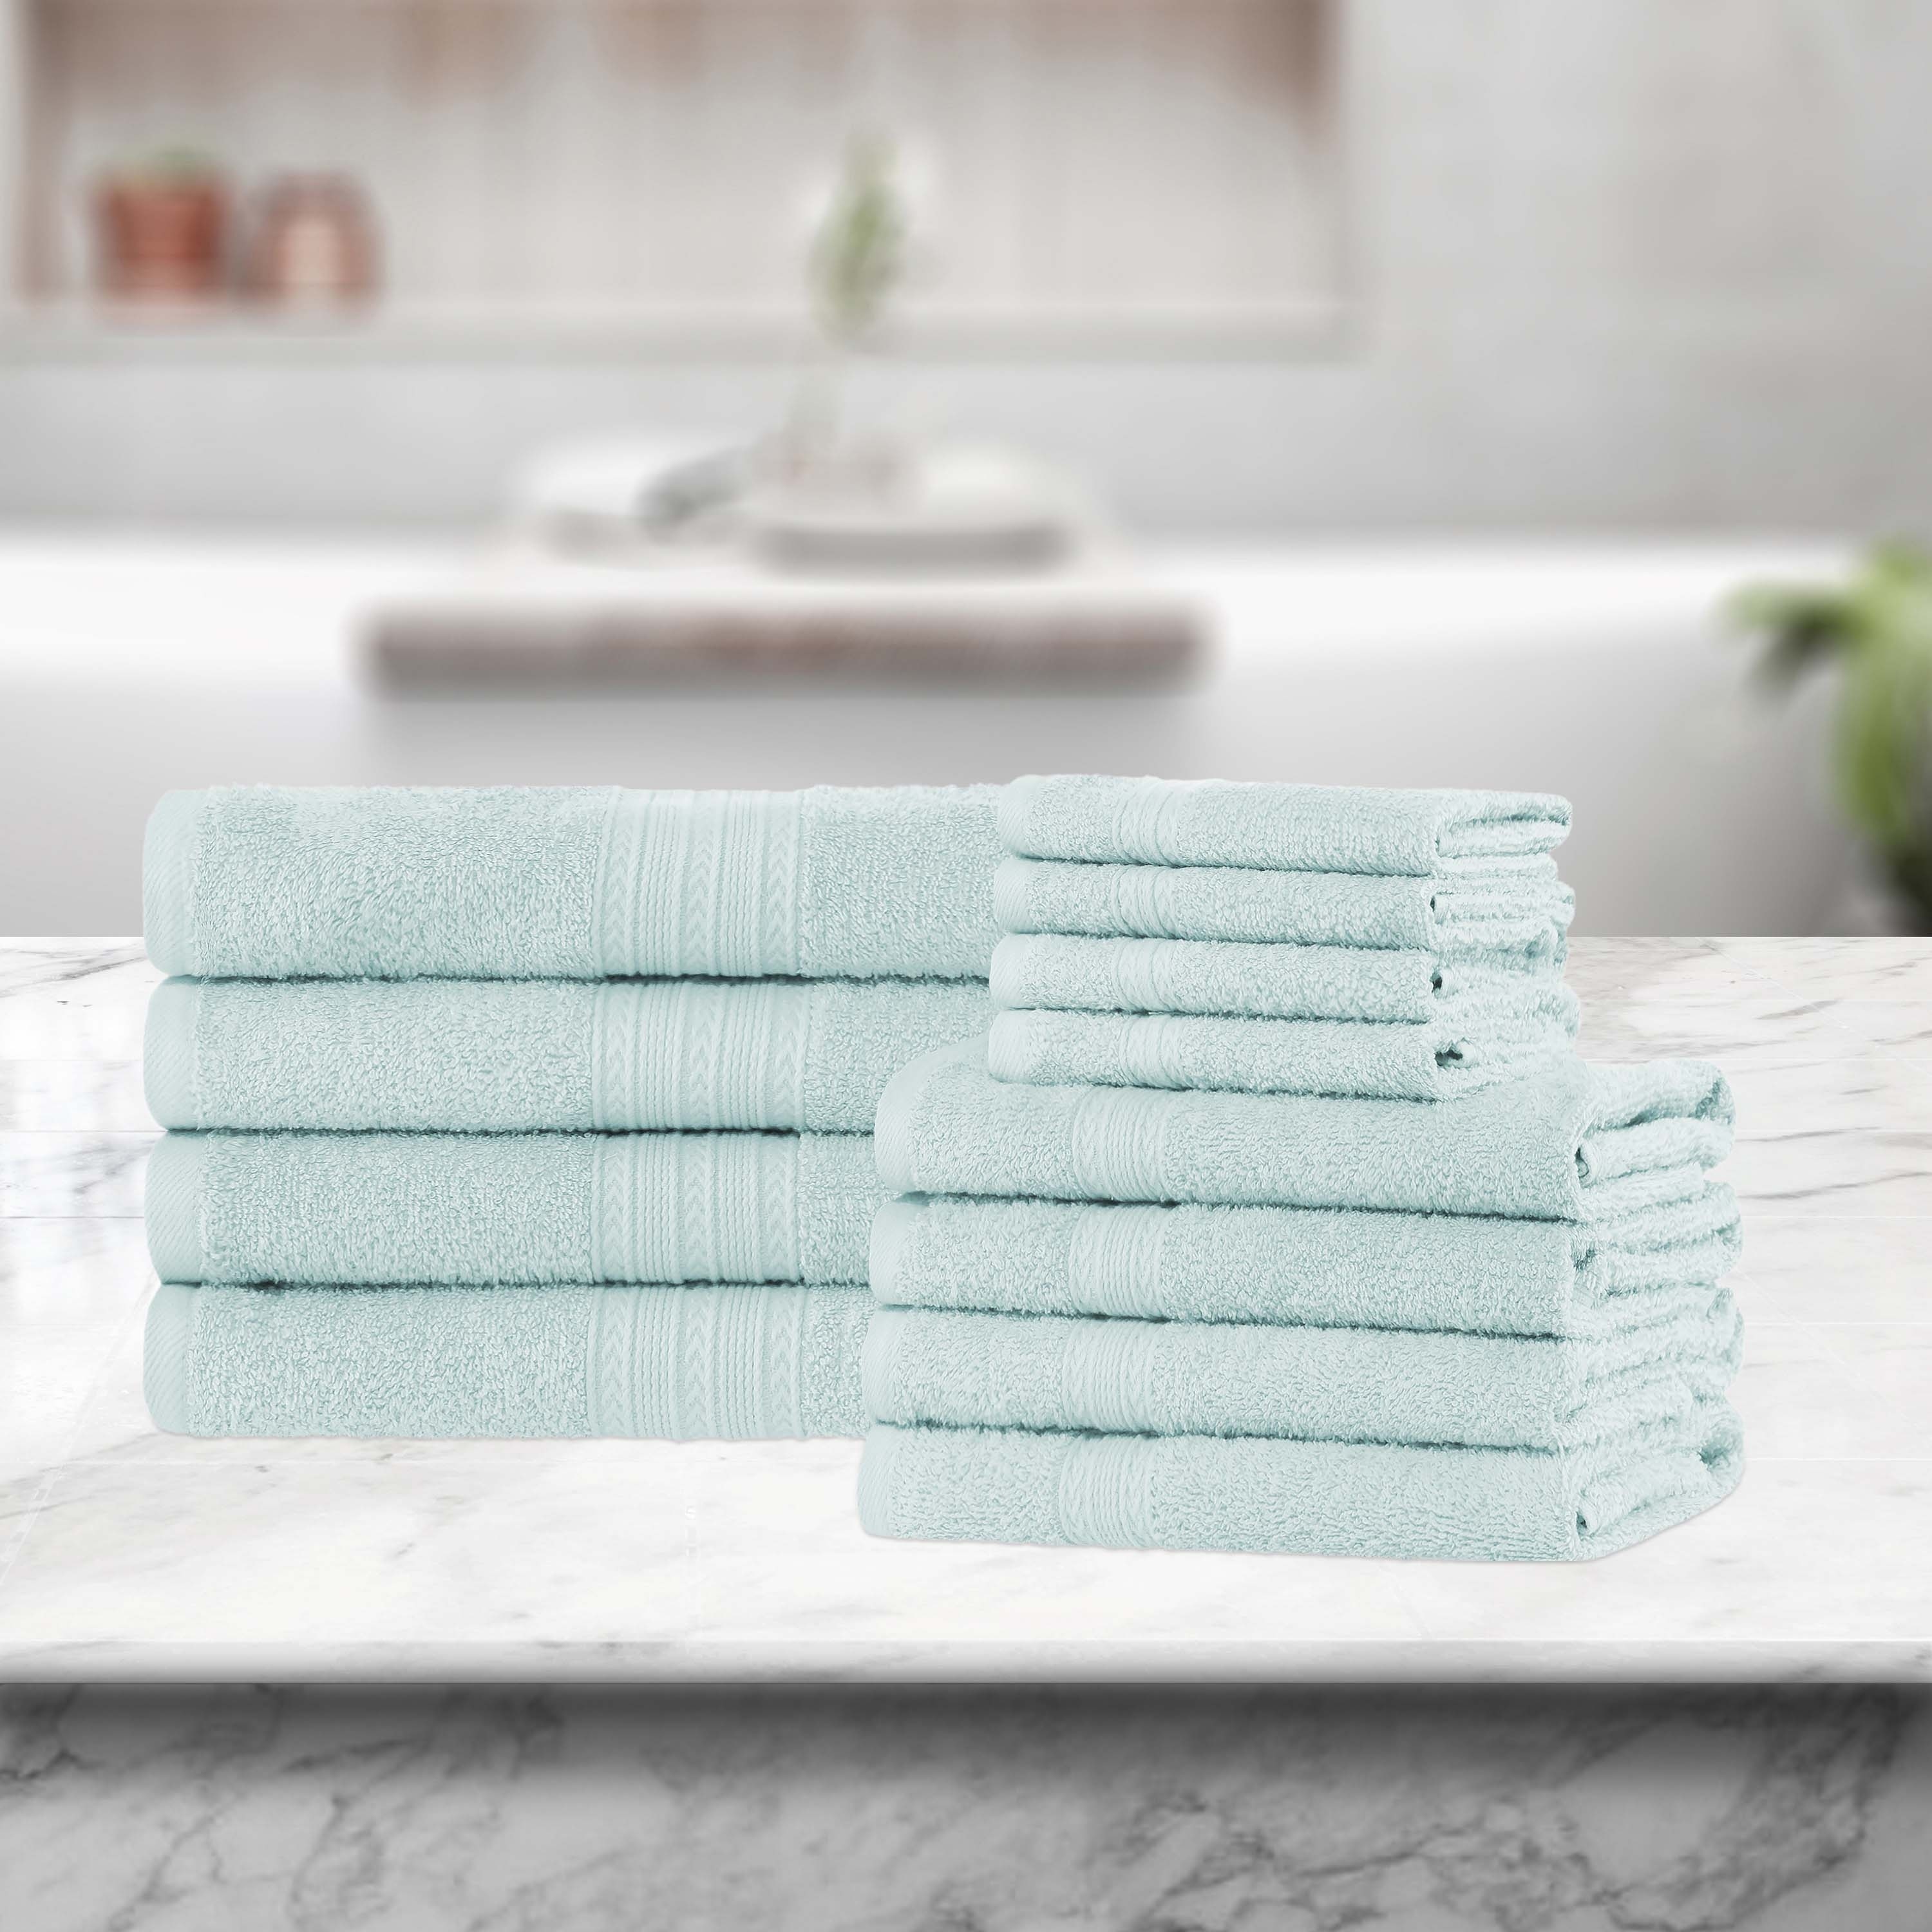 https://ak1.ostkcdn.com/images/products/is/images/direct/236d186b07eaba688afc3789dddaa6bd239c7768/Eco-Friendly-Sustainable-Cotton-Bathroom-Towel-Set-of-12-by-Superior.jpg